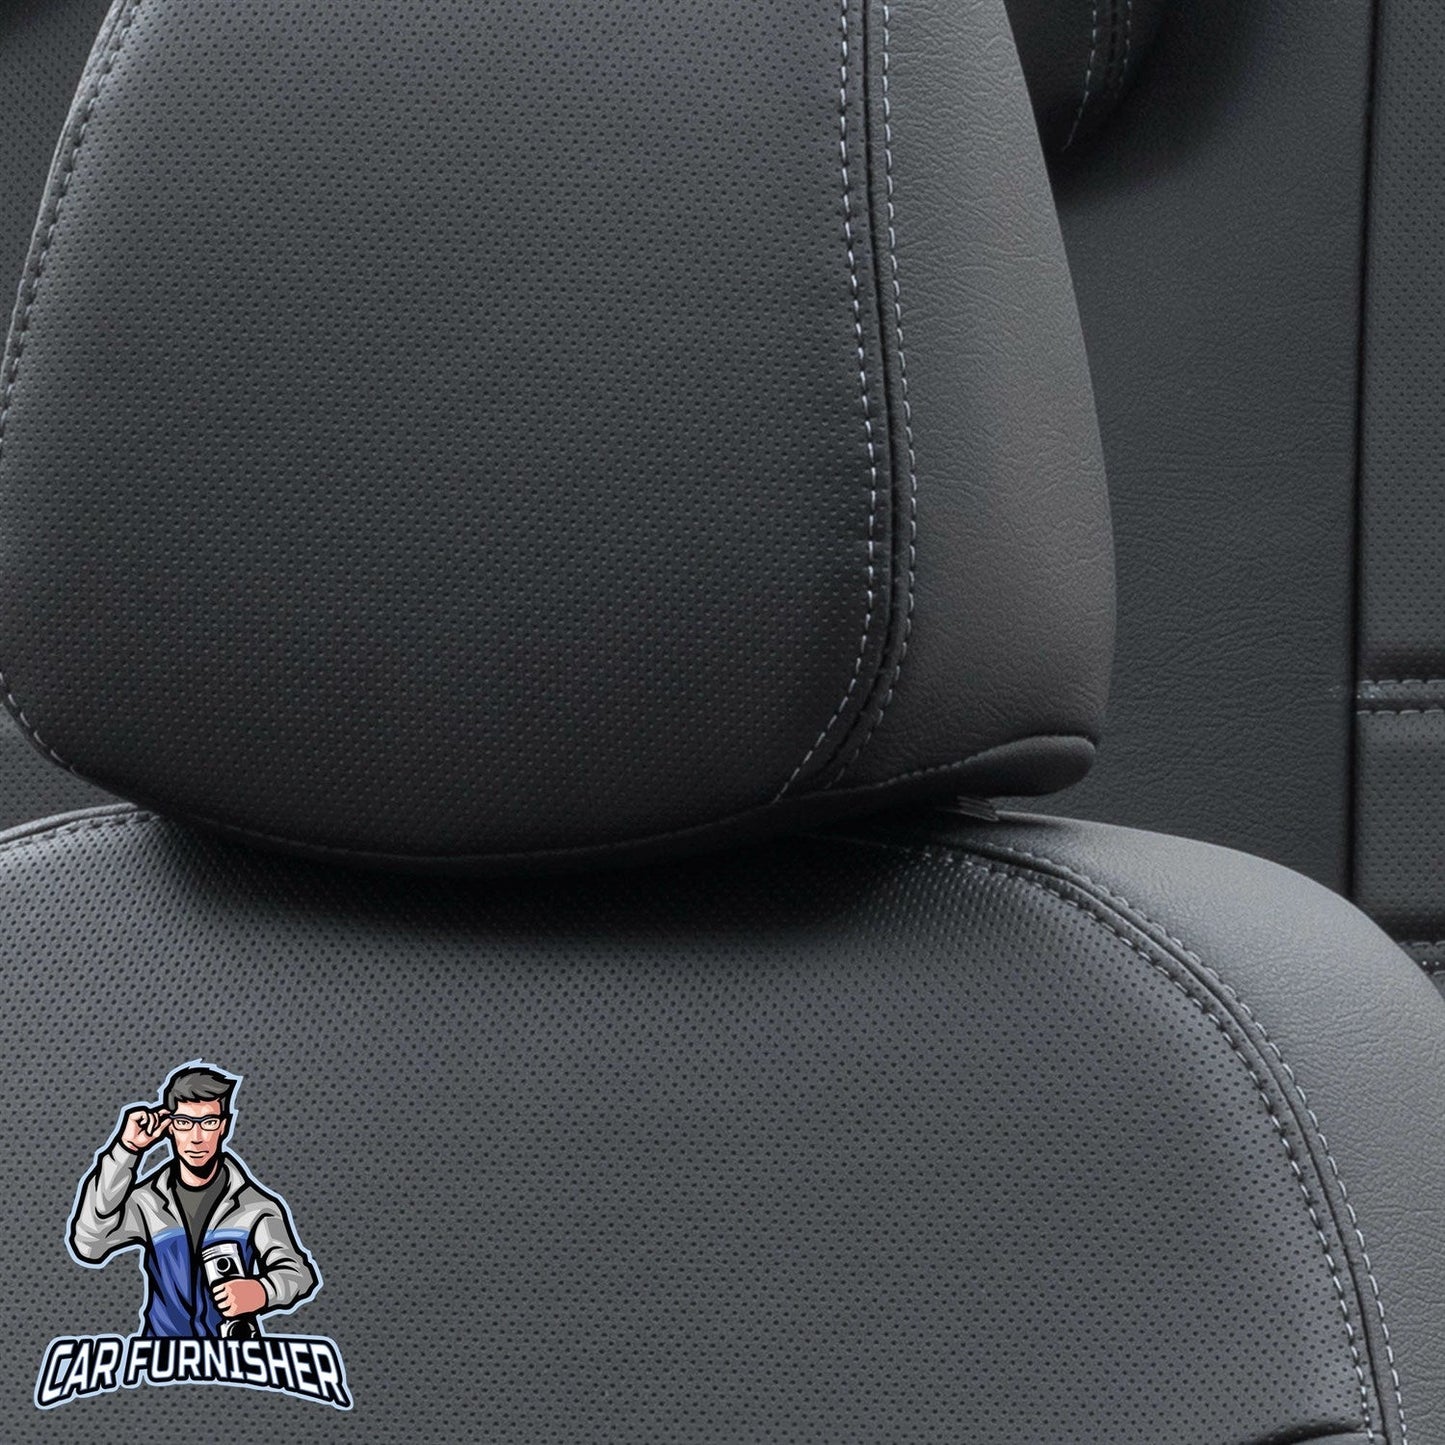 Peugeot 106 Seat Covers Istanbul Leather Design Black Leather